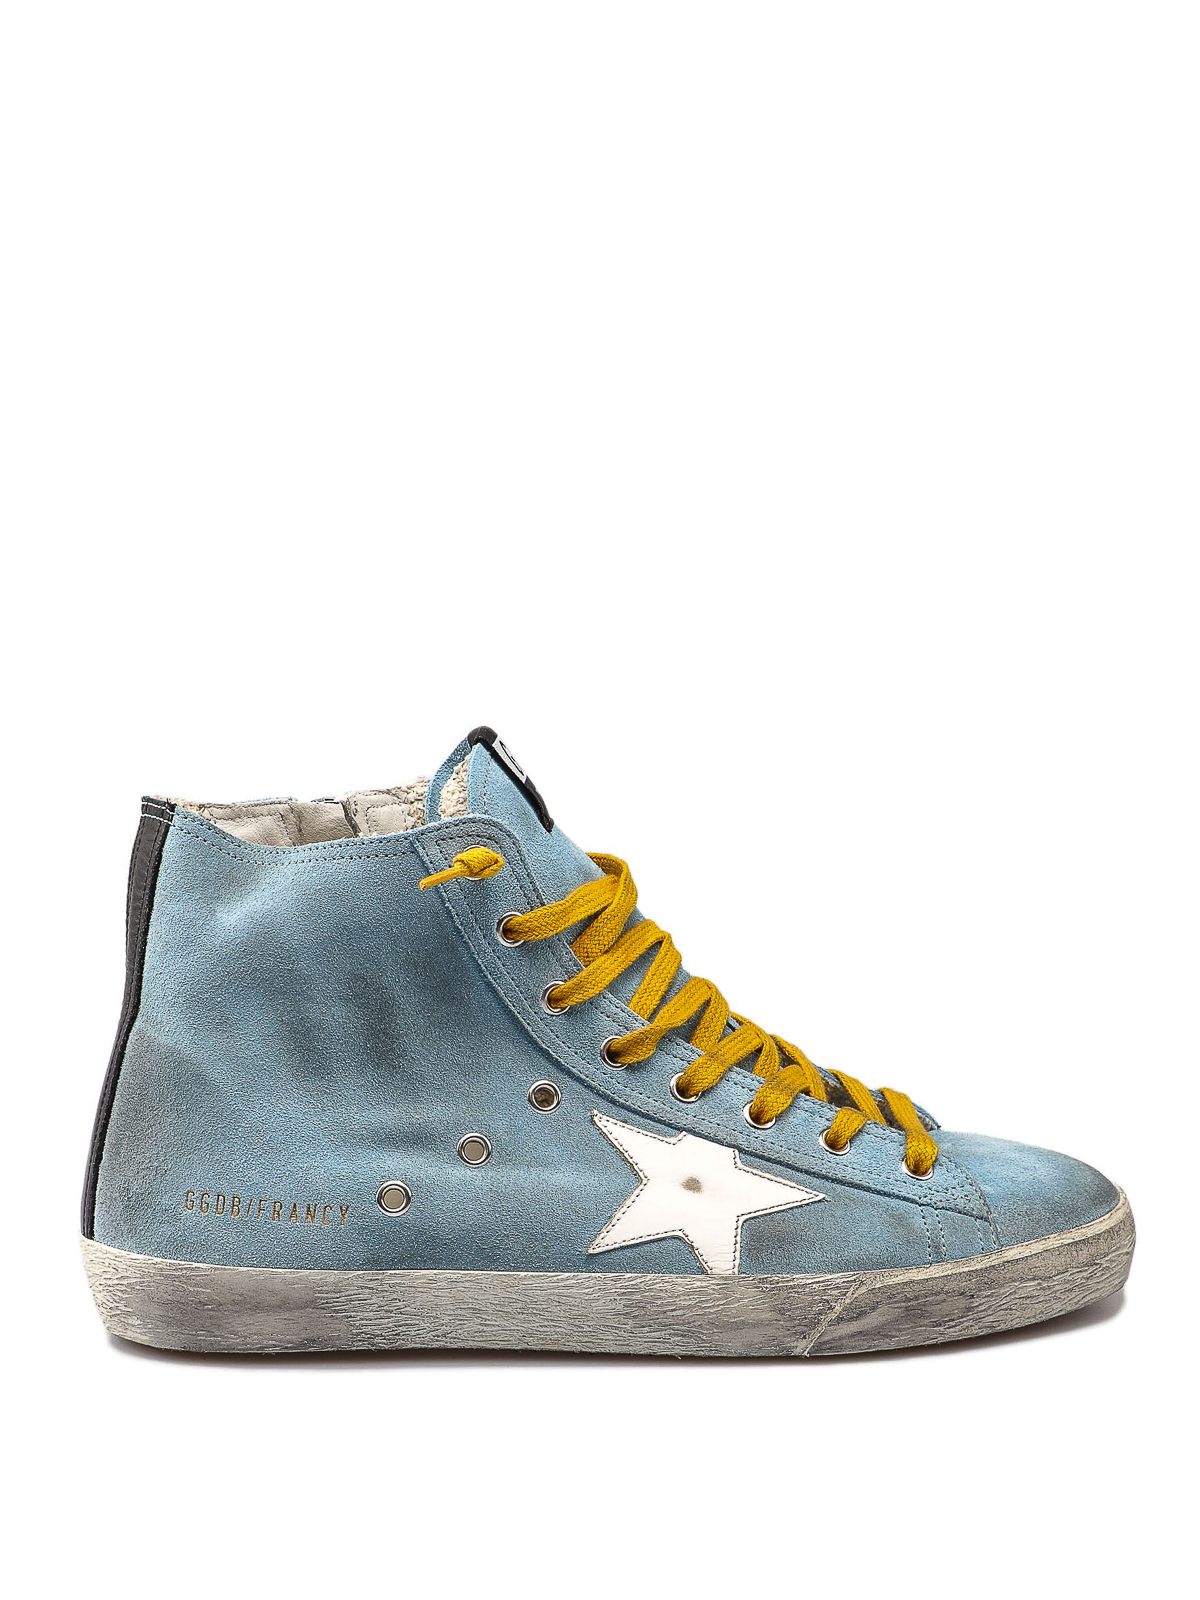 Trainers Golden Goose - Francy light blue suede sneakers - G34MS591B69